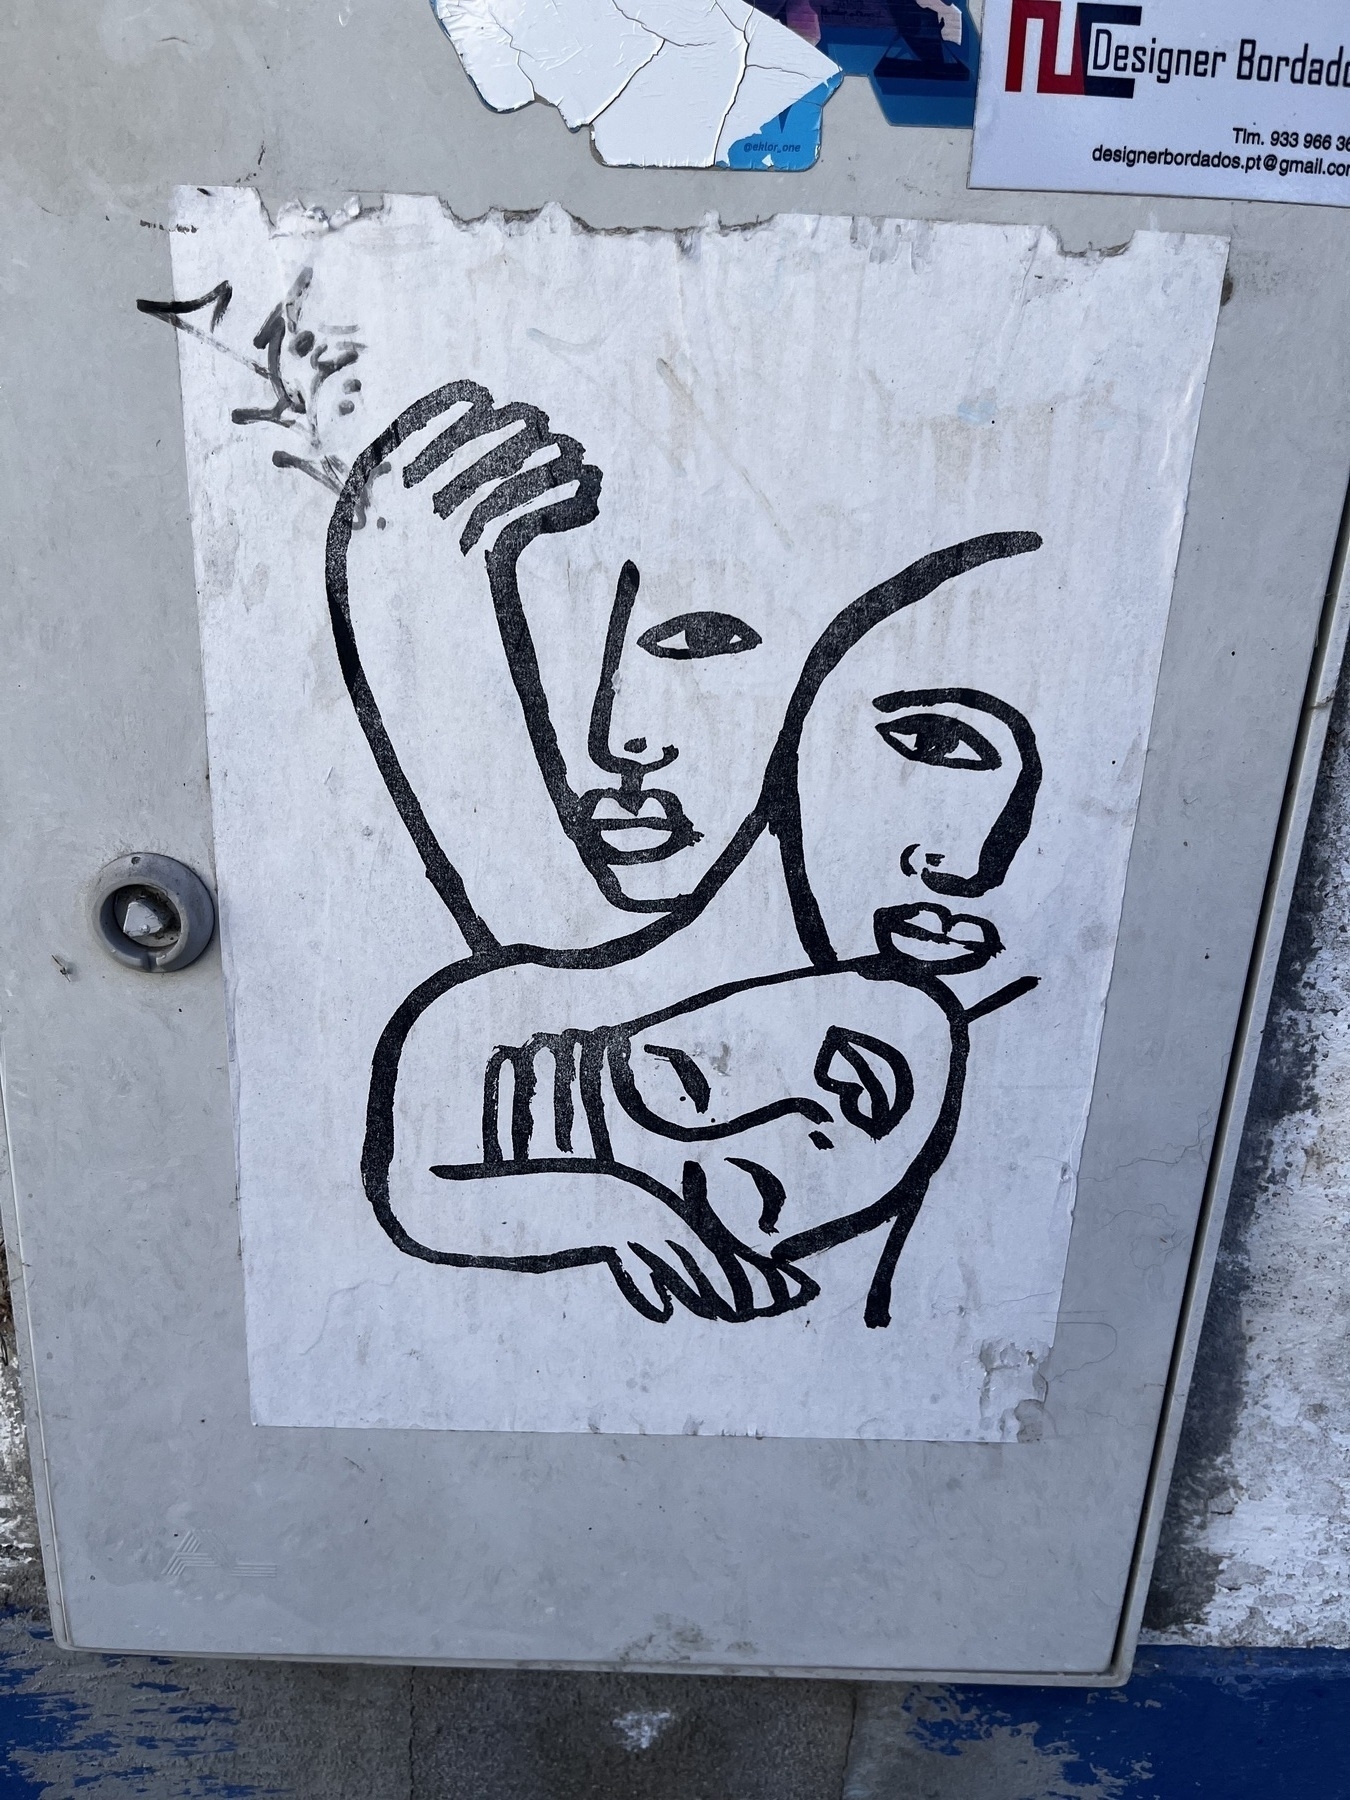 A small street drawing showing three faces intertwined with some eyes closed and some shut